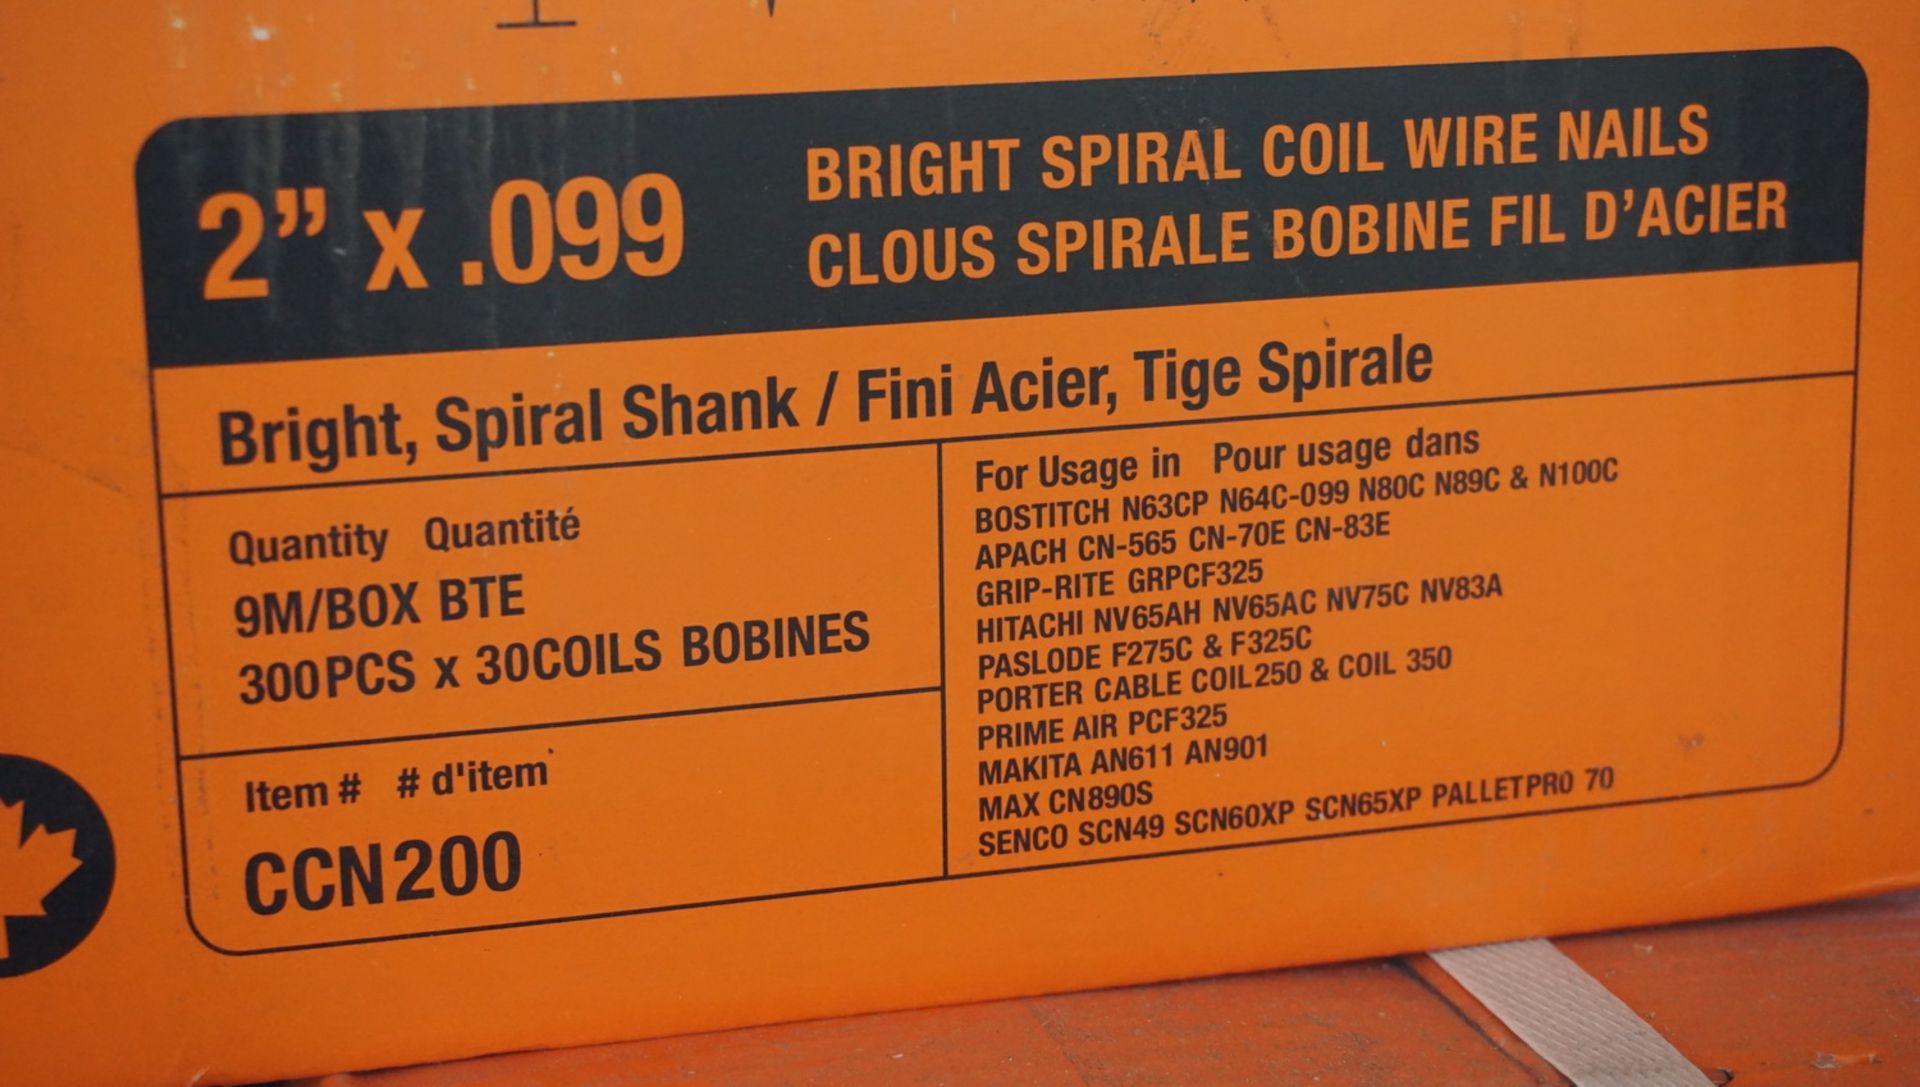 BOXES - CFPS CCN200 2" X .099 BRIGHT SPIRAL COIL WIRE NAILS (300 PCS / COIL) (30 COILS / BOX) - Image 2 of 2